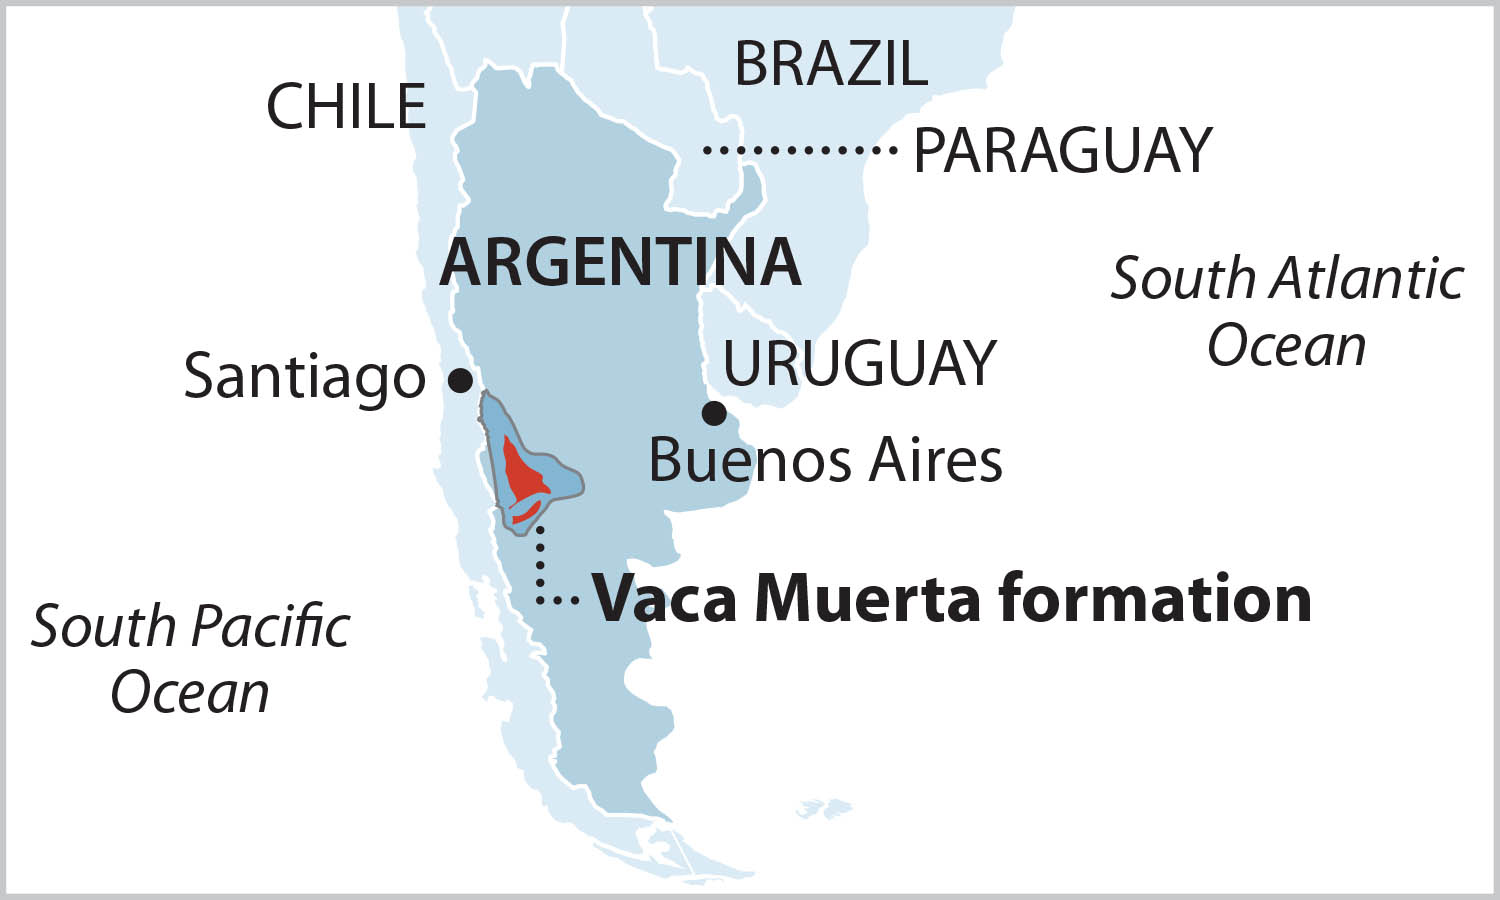 IEEFA Argentina: Oil and gas production in Vaca Muerta, Patagonia awaits direction from new leadership | IEEFA